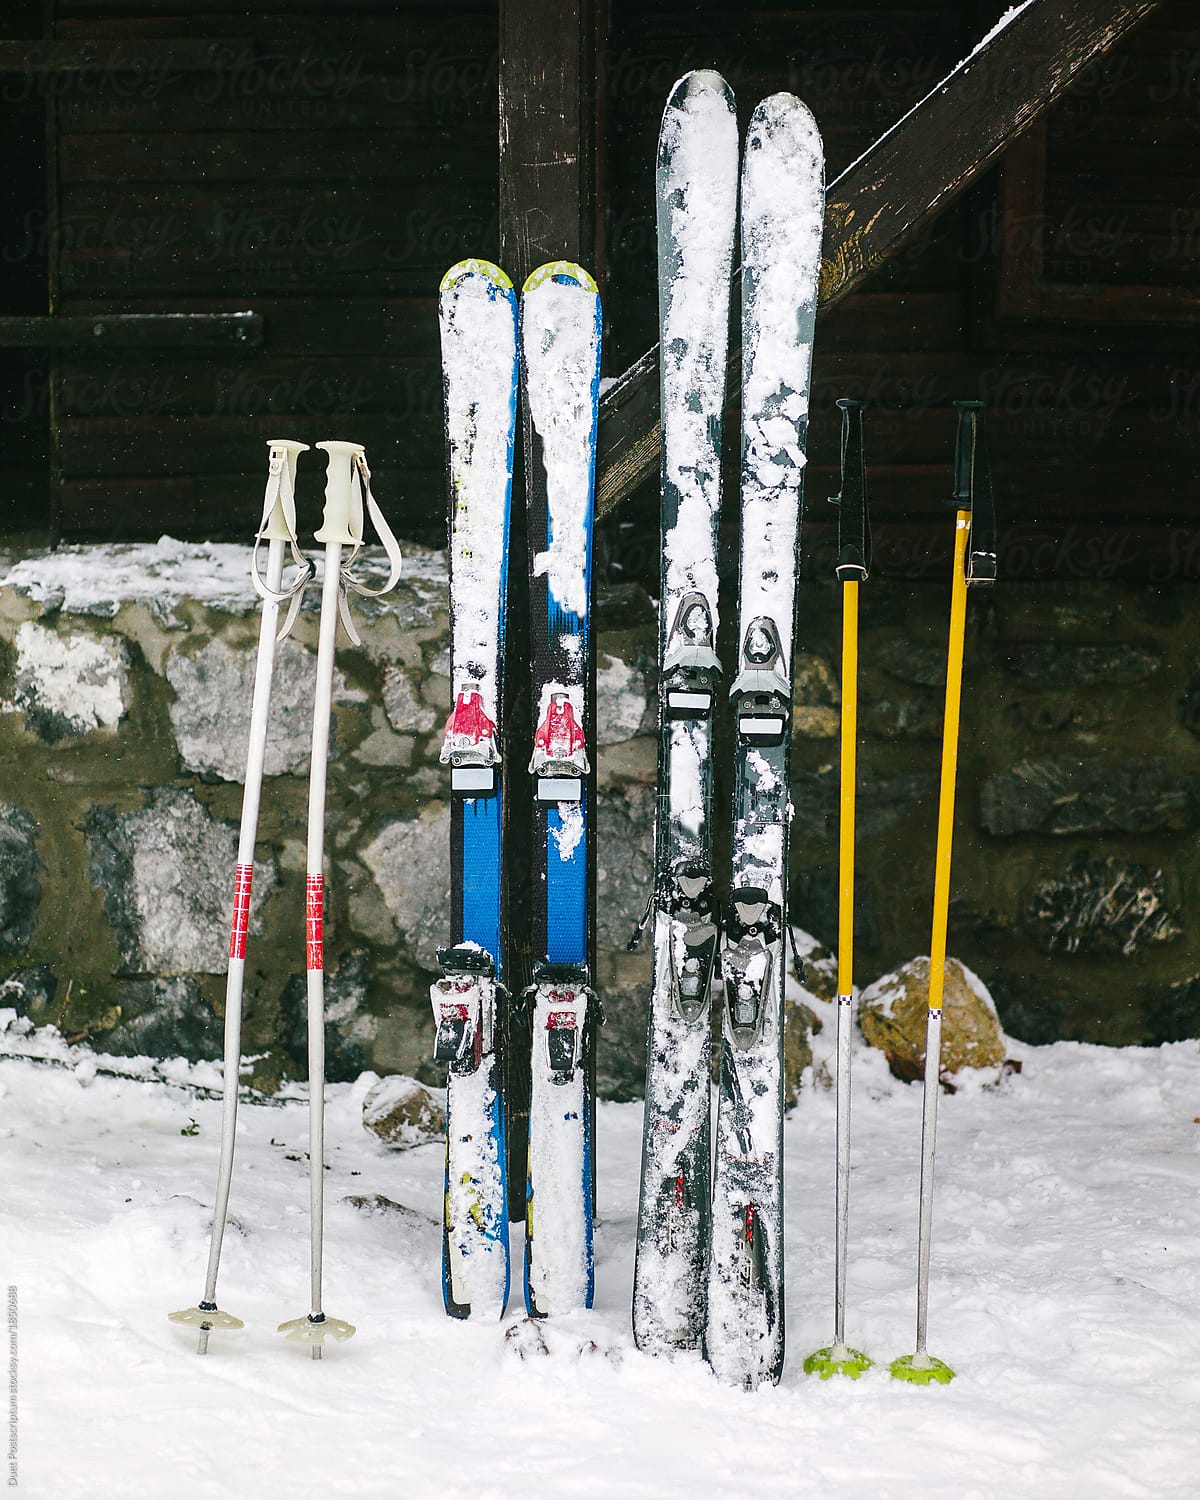 Two pairs of ski in snow